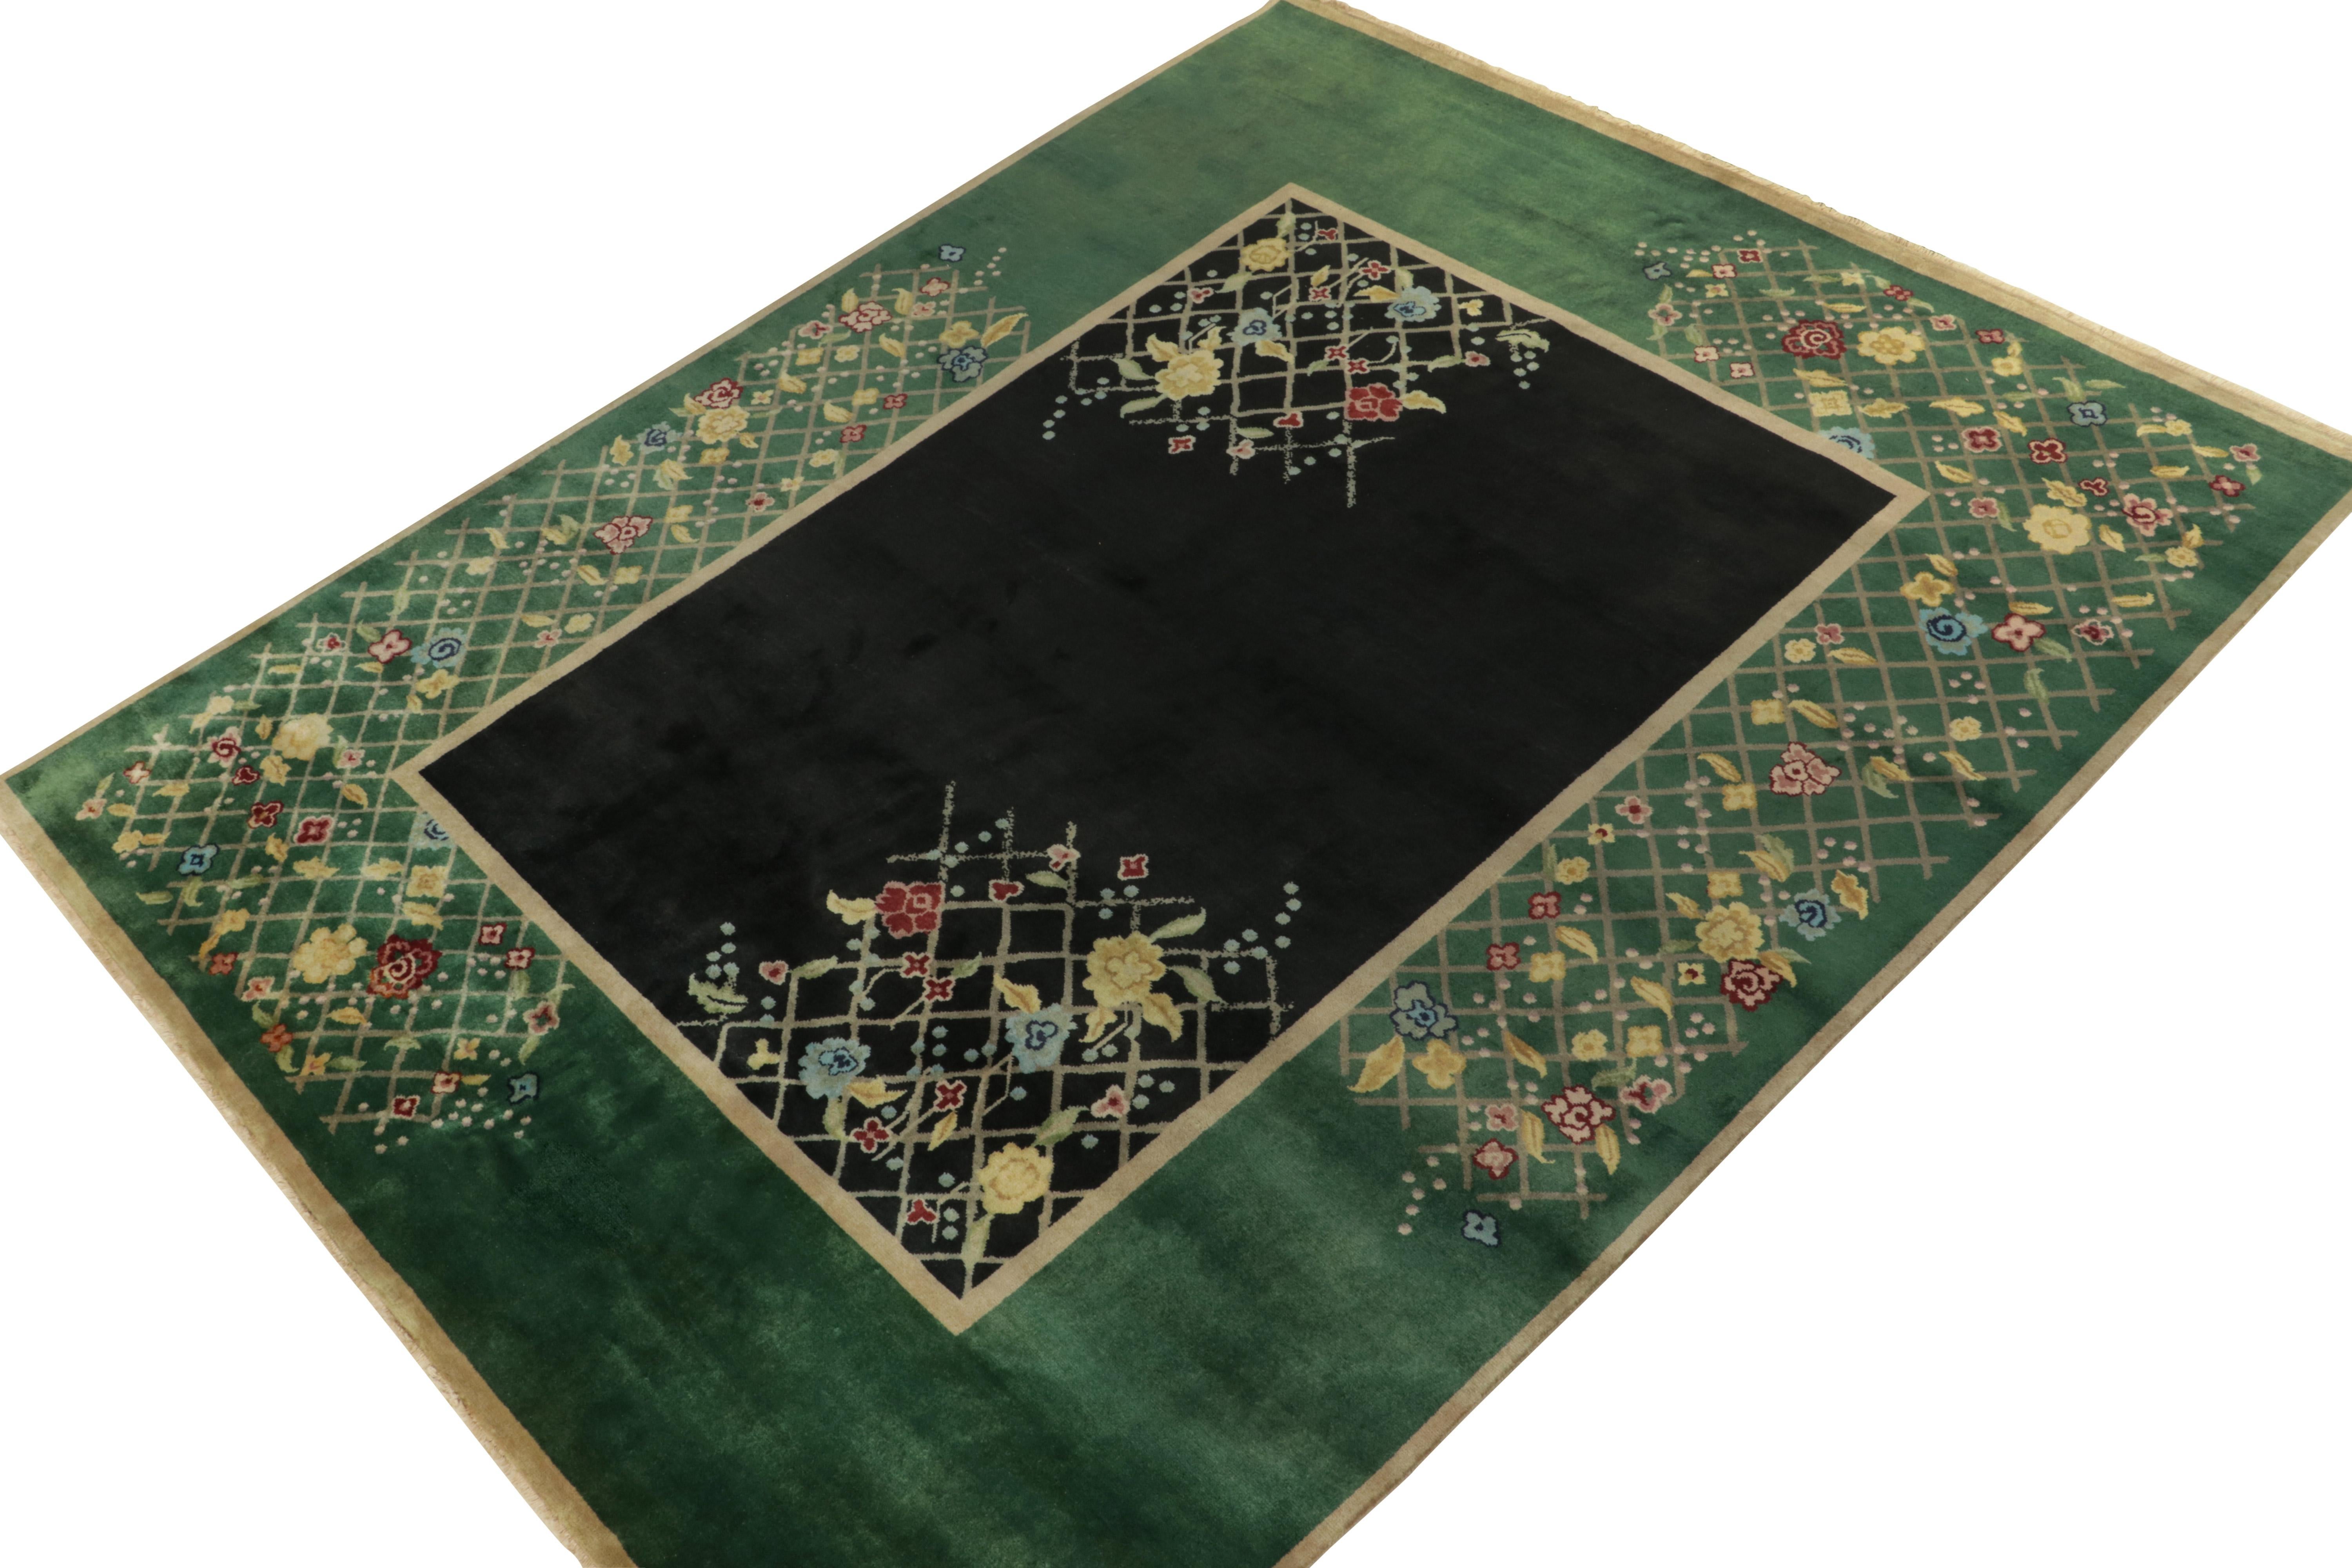 Hand-knotted in luscious wool, an 8x10 Art Deco rug, inspired by Chinese sensibilities of the 1920s. 

On the Design: A teal-green border marries a bold black field, both enjoying the sheen of this fabulous blend of yarns for a lustrous, healthy